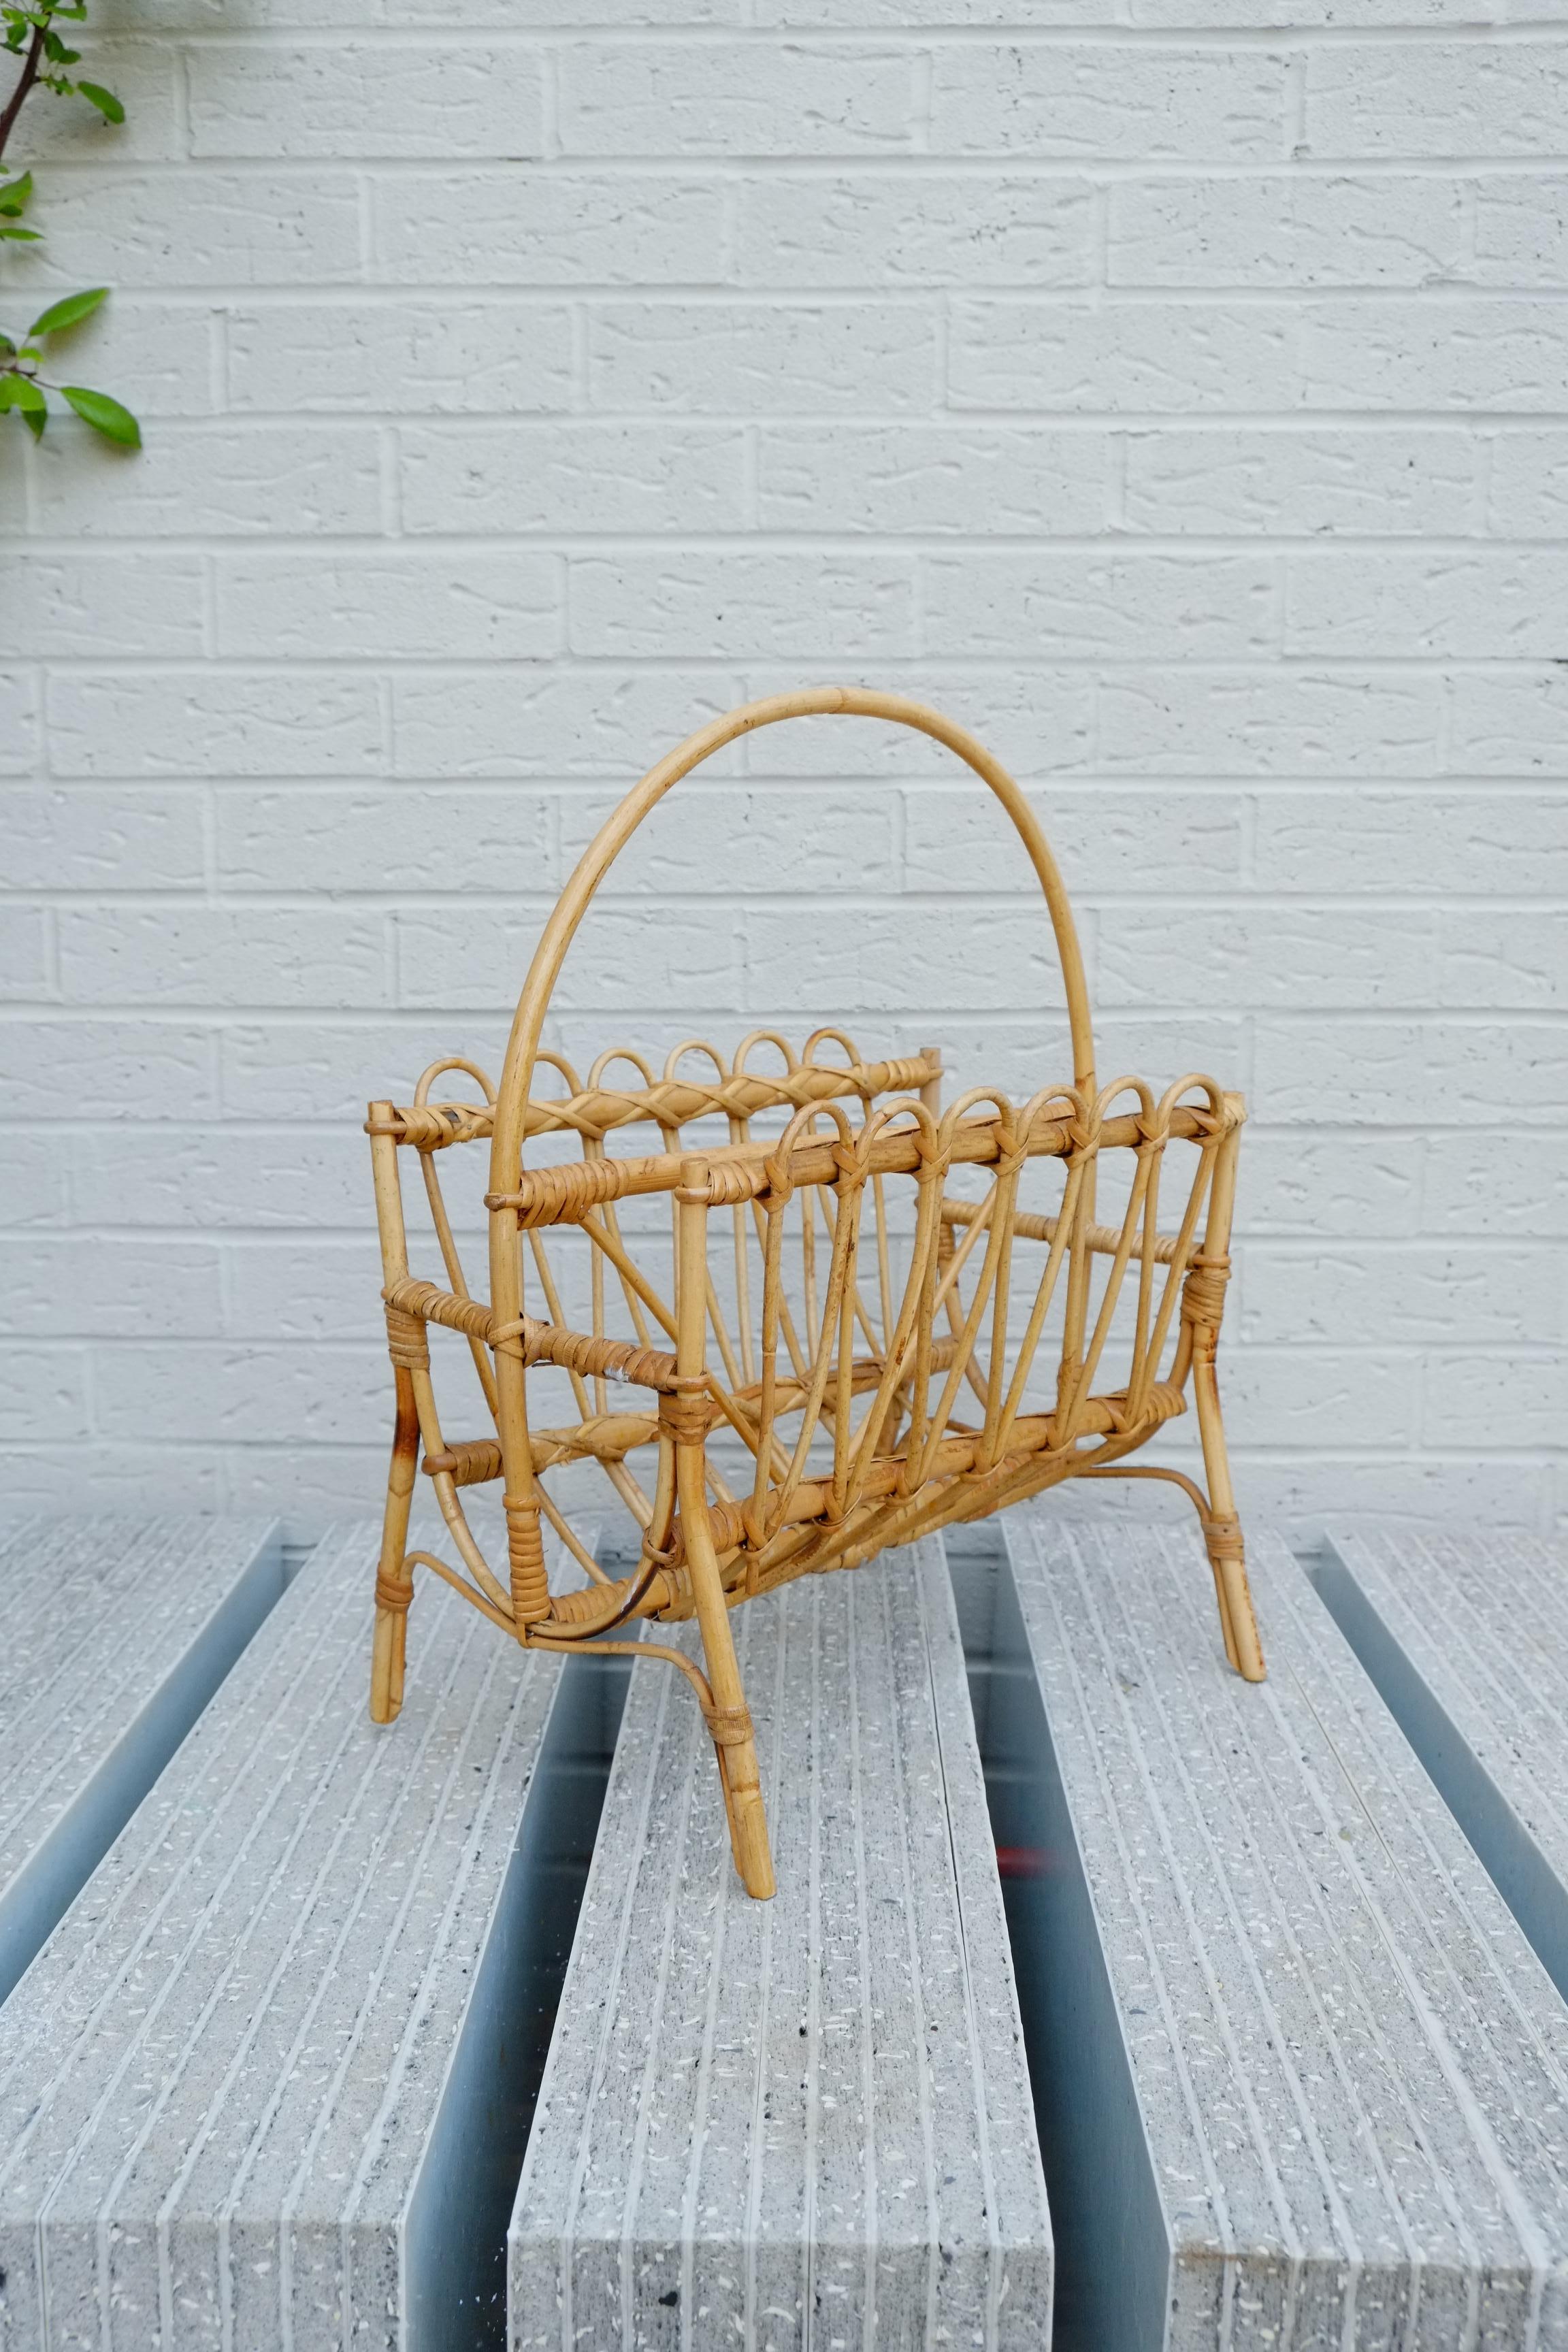 Beautiful 1960s Mid-Century Modern magazine rack stand in bamboo. The organic beauty of the woven materials is timeless and classic, making bamboo and rattan furniture incredibly versatile. This piece has a particularly elegant and light decorative